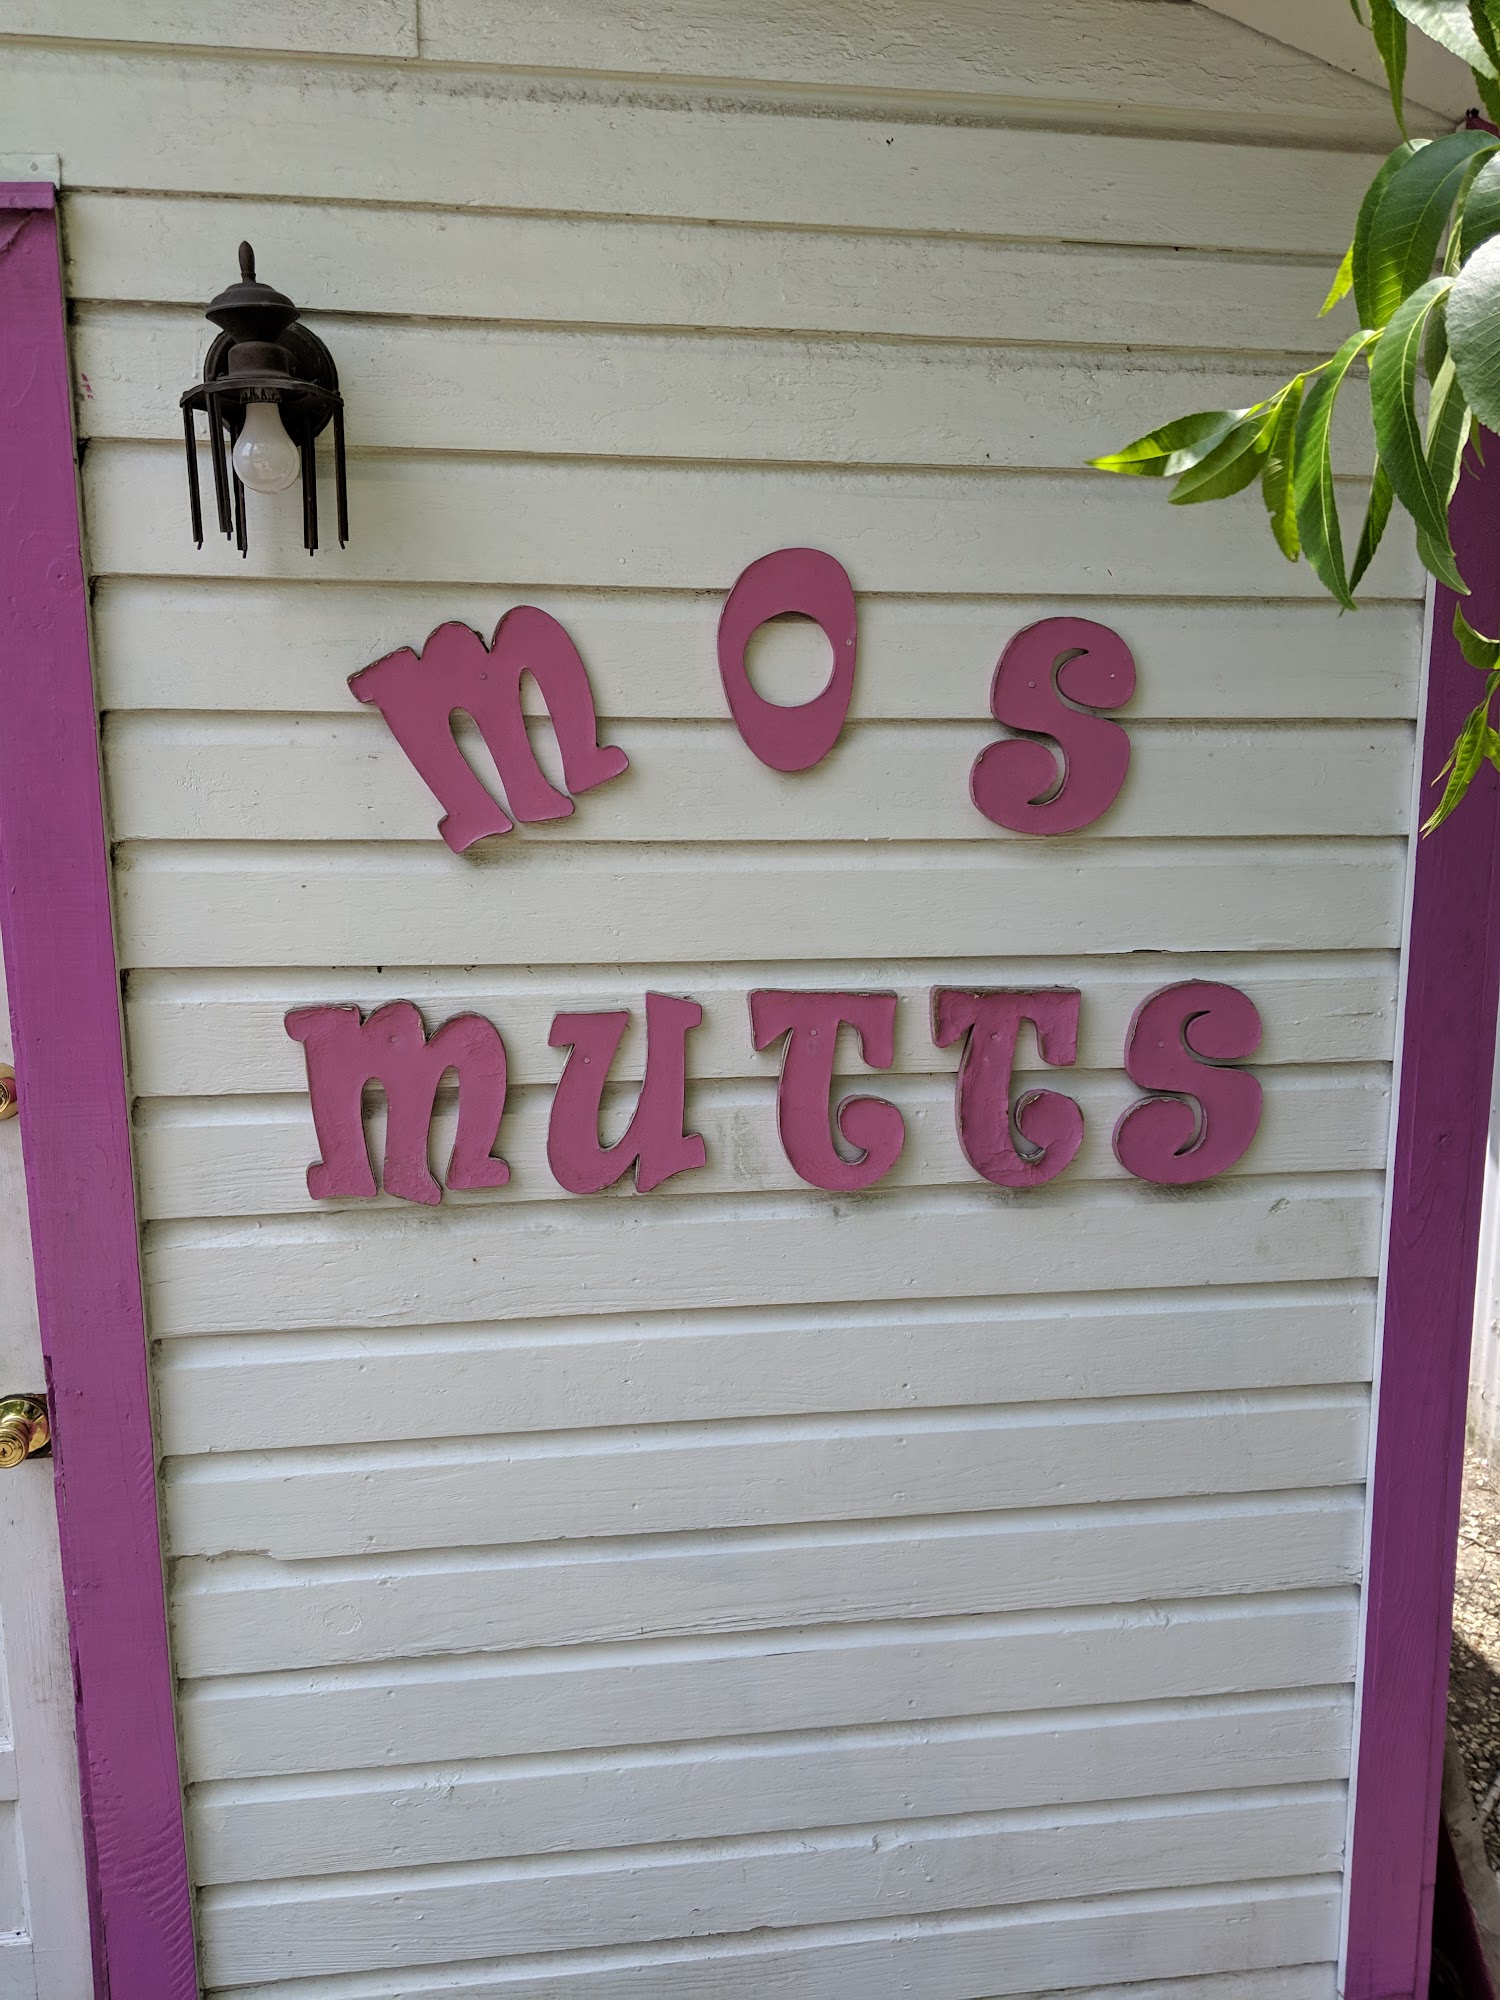 Mo's Mutts 2001 N Cleveland St, Dayton Texas 77535